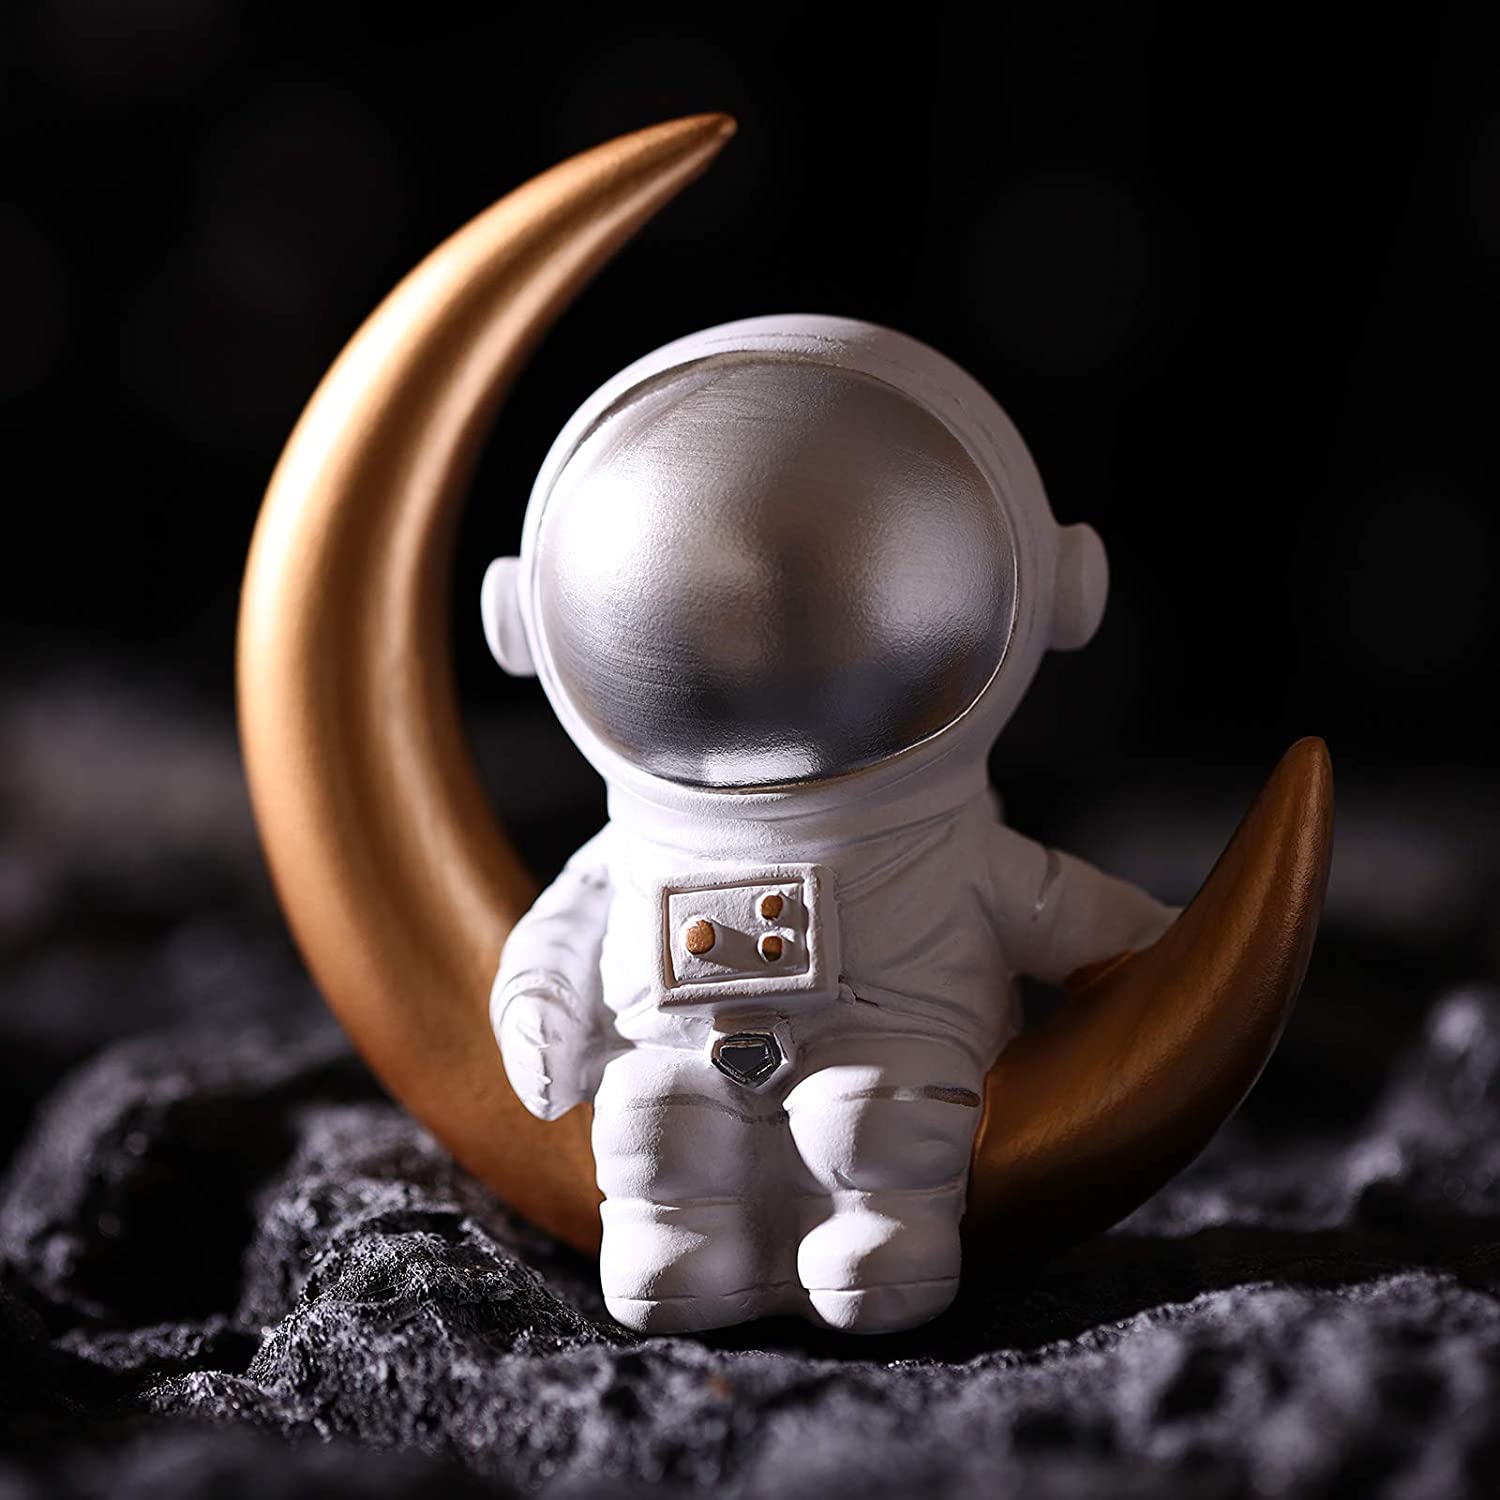 3D Astronaut Figurines Home Decoration / Kids Room QuirkyStore.in